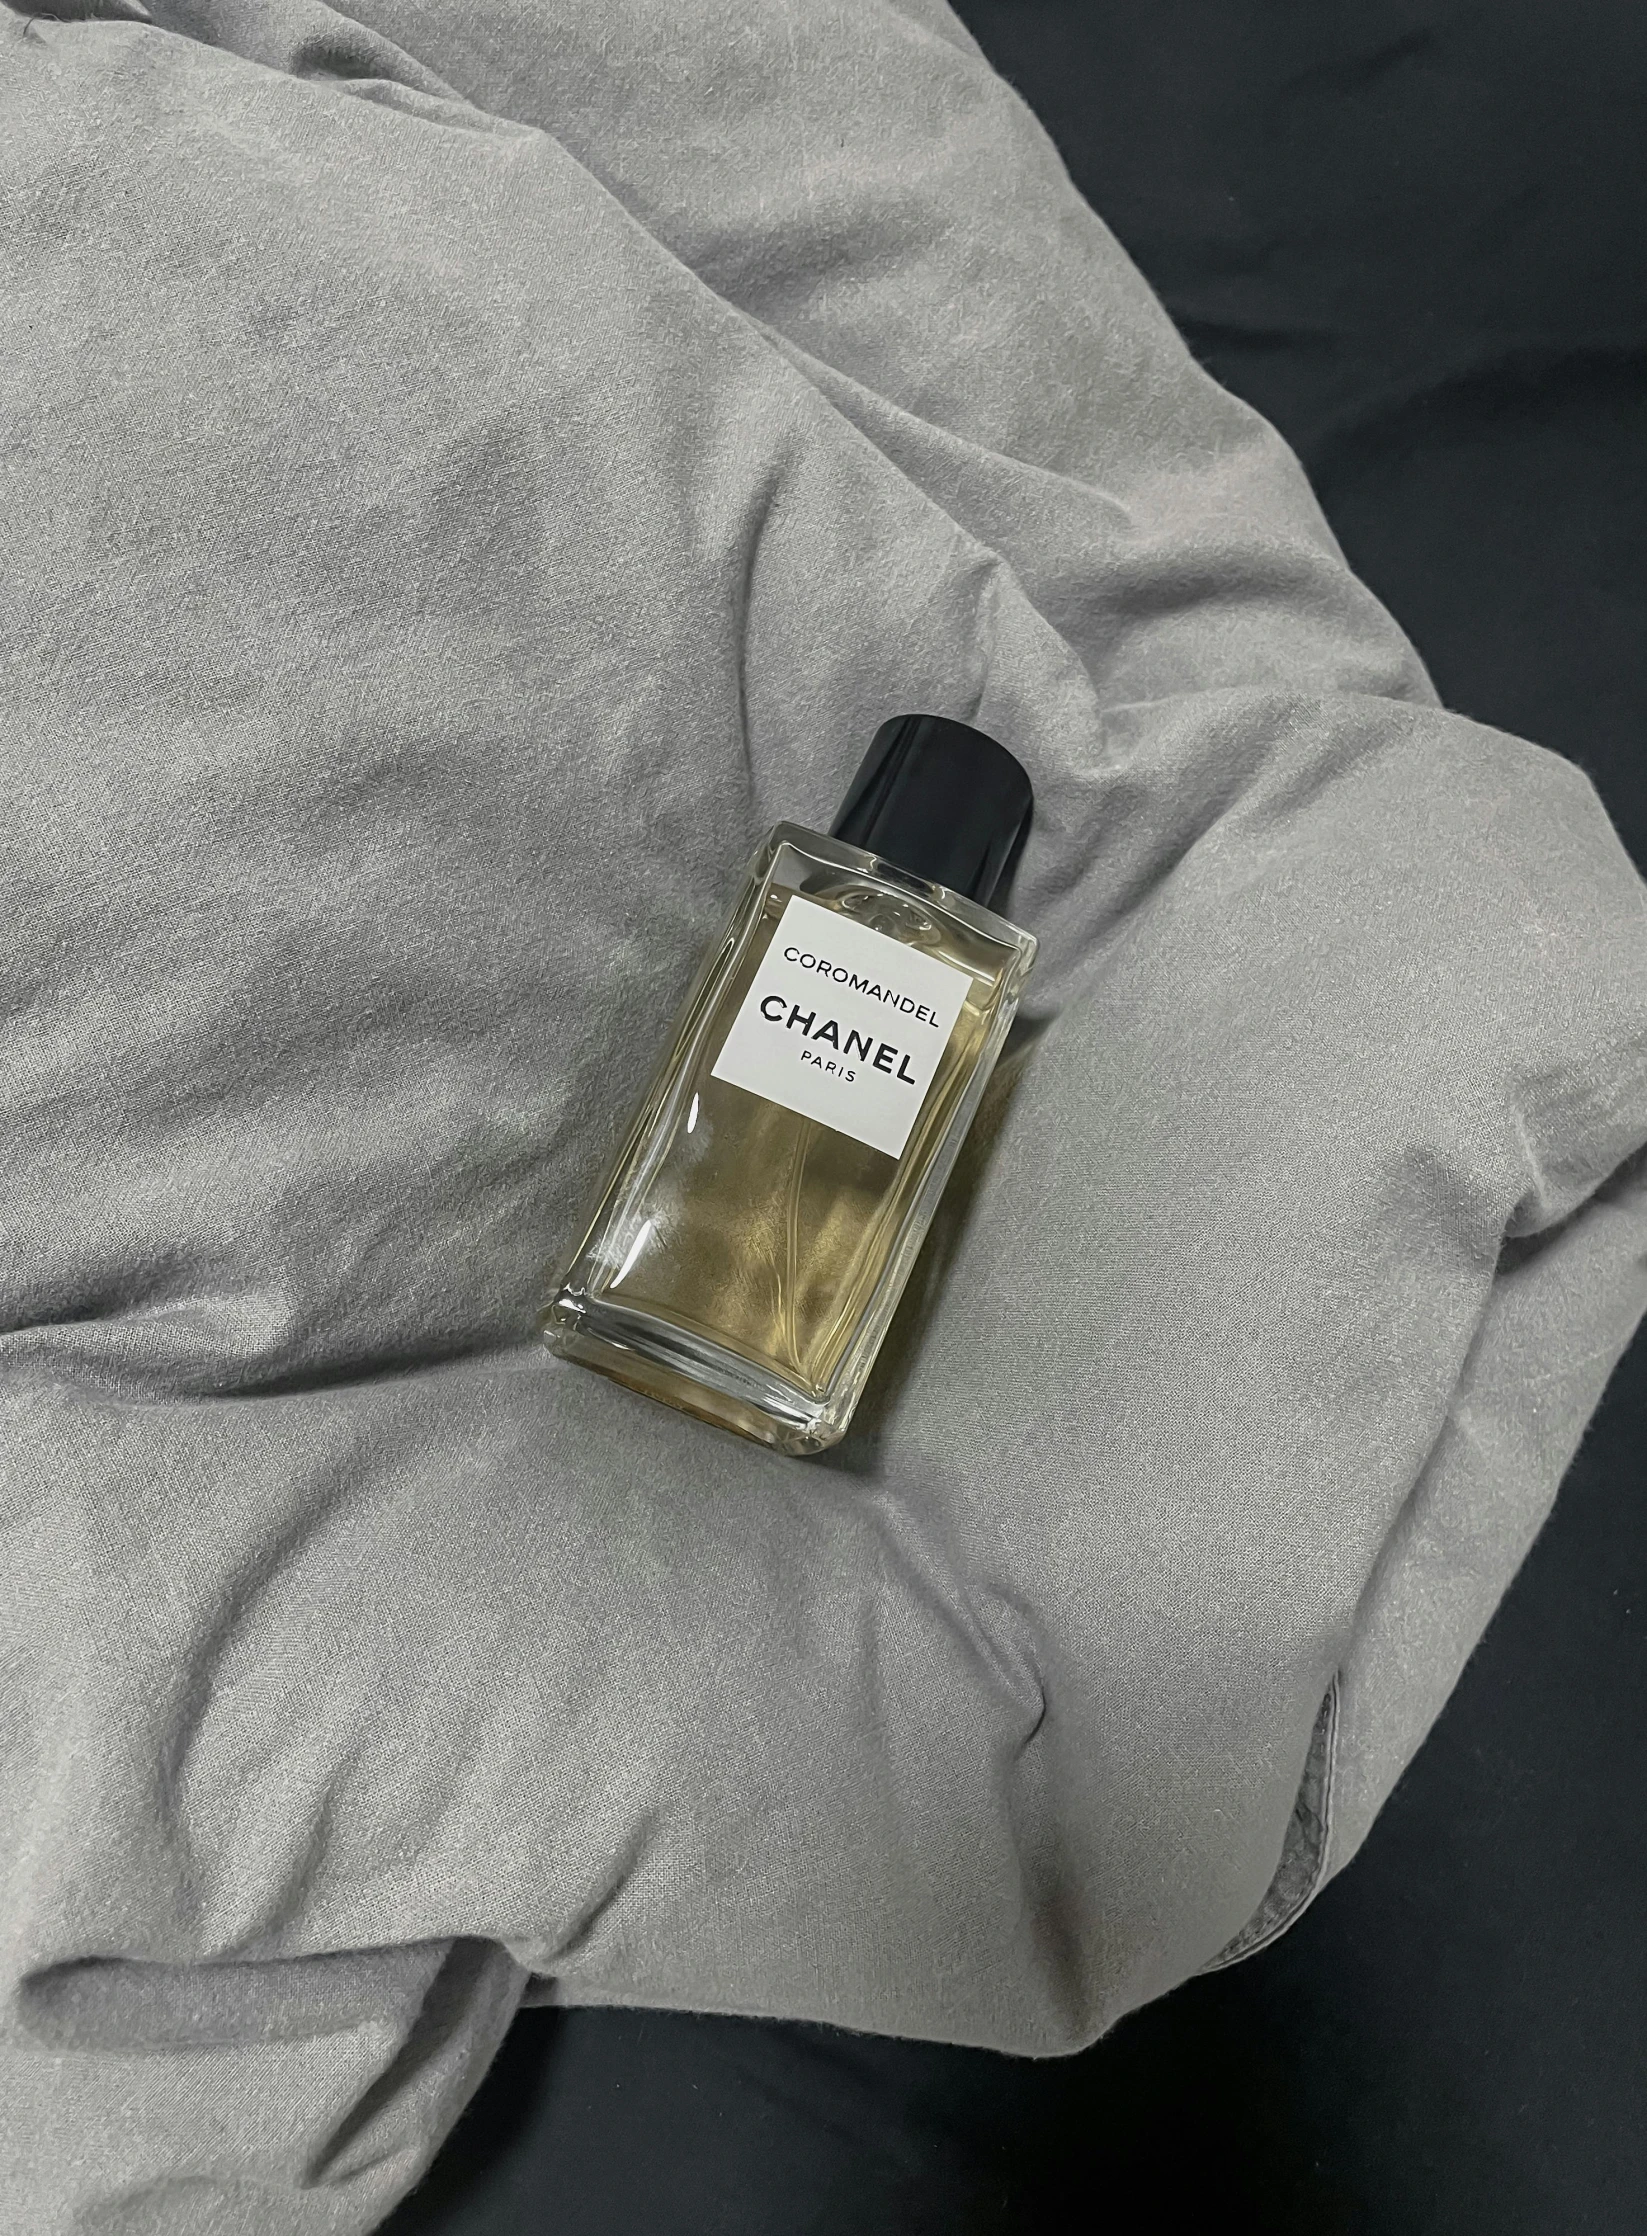 a bottle that is sitting on the pillow